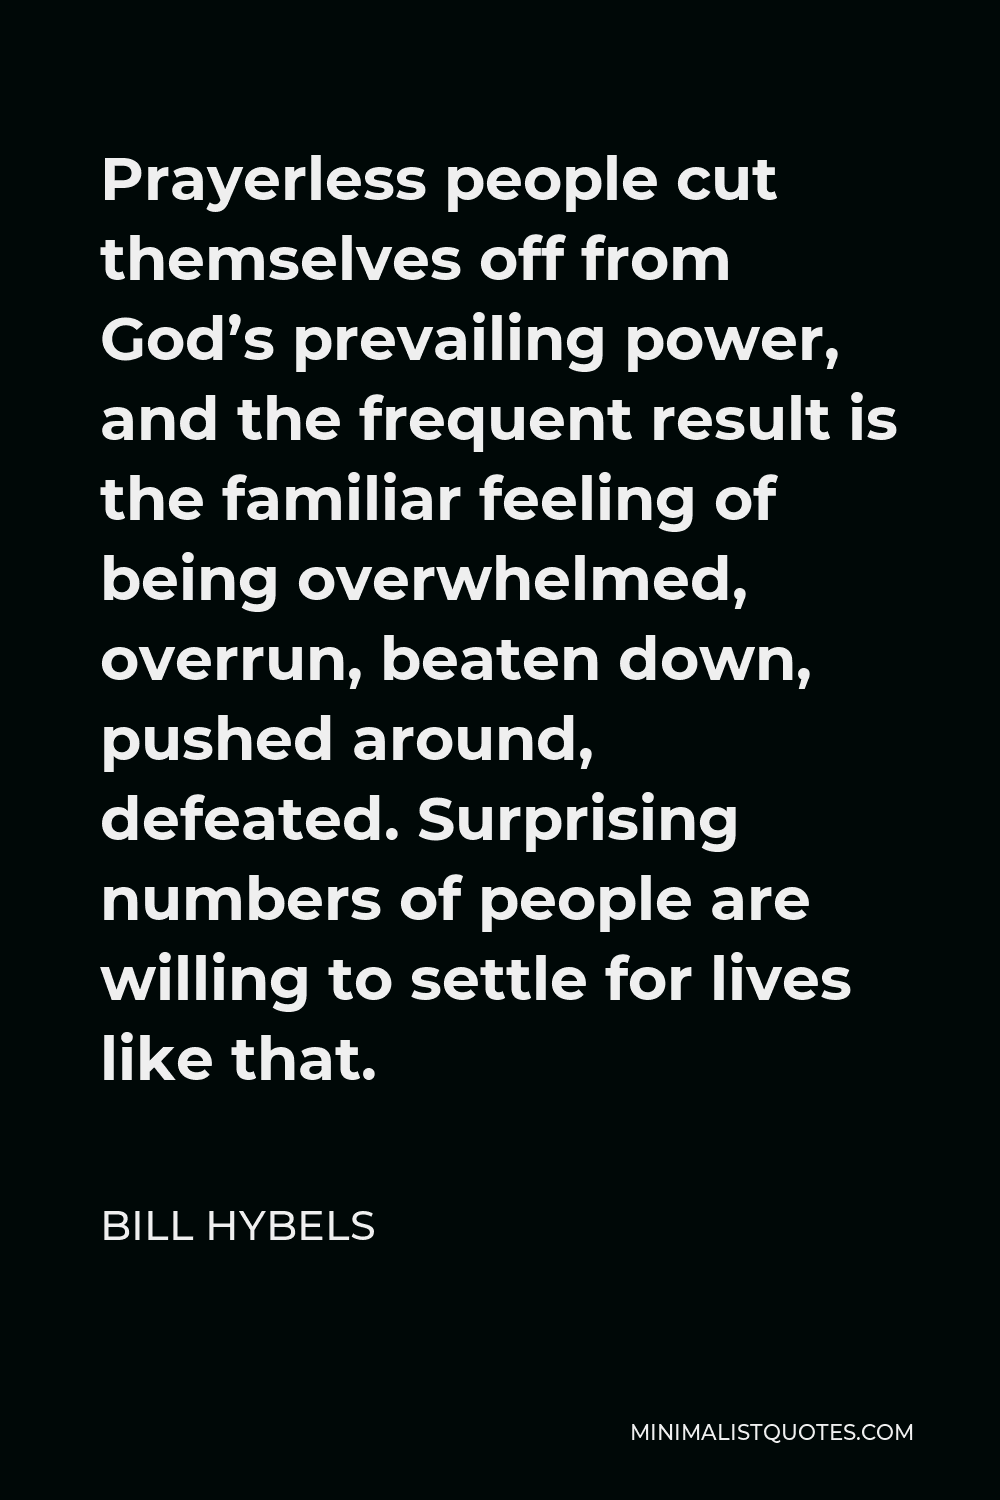 Bill Hybels Quote - Prayerless people cut themselves off from God’s prevailing power, and the frequent result is the familiar feeling of being overwhelmed, overrun, beaten down, pushed around, defeated. Surprising numbers of people are willing to settle for lives like that.